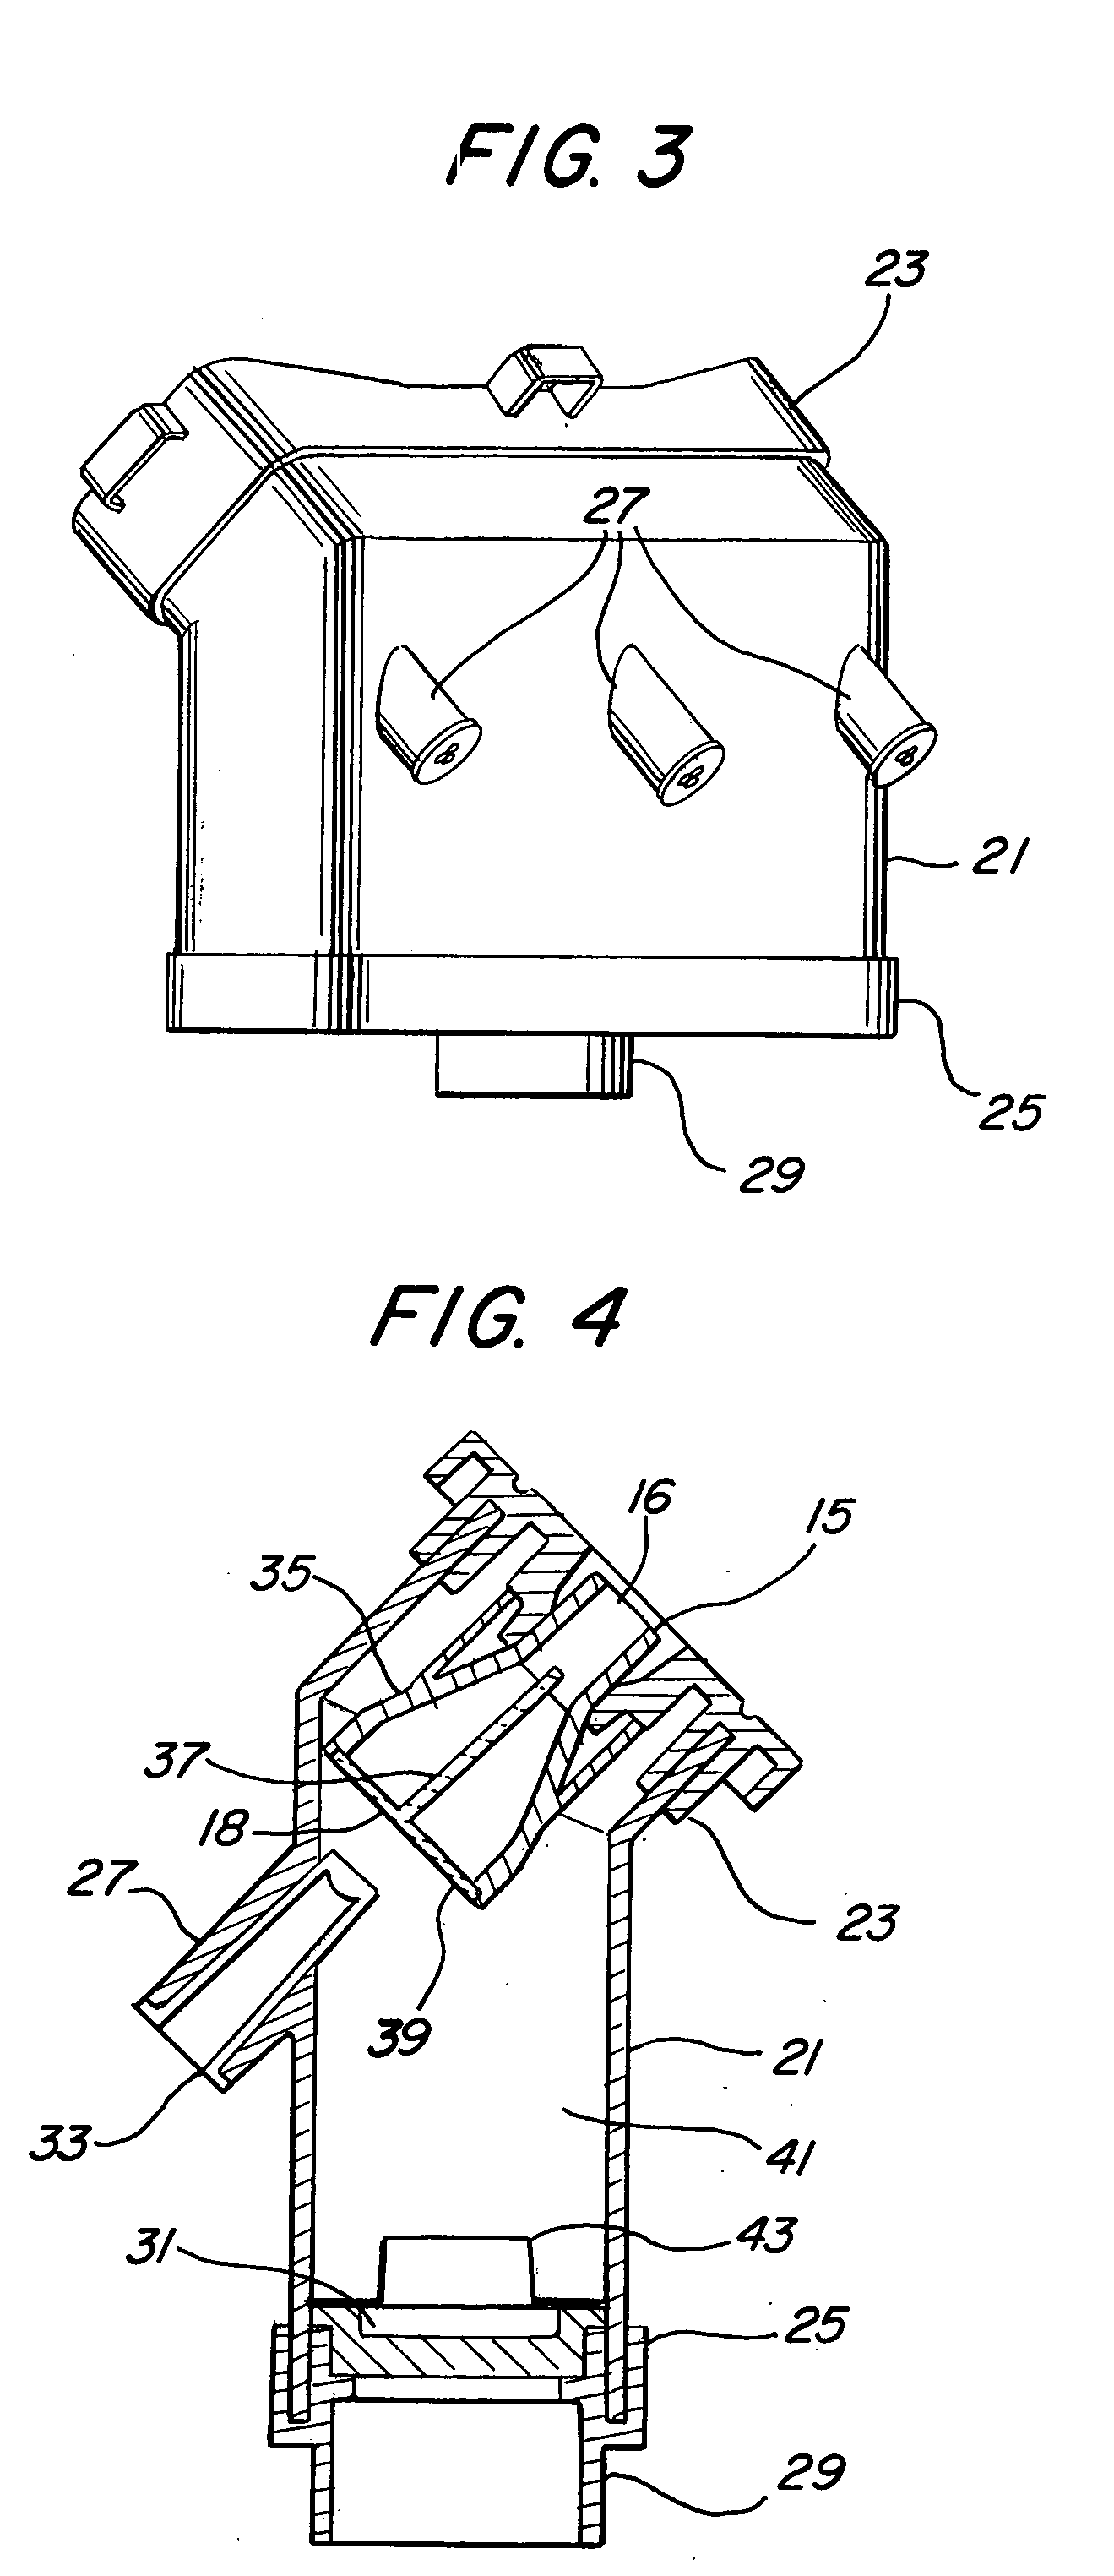 Laminar flow lighted waterfall apparatus for spa